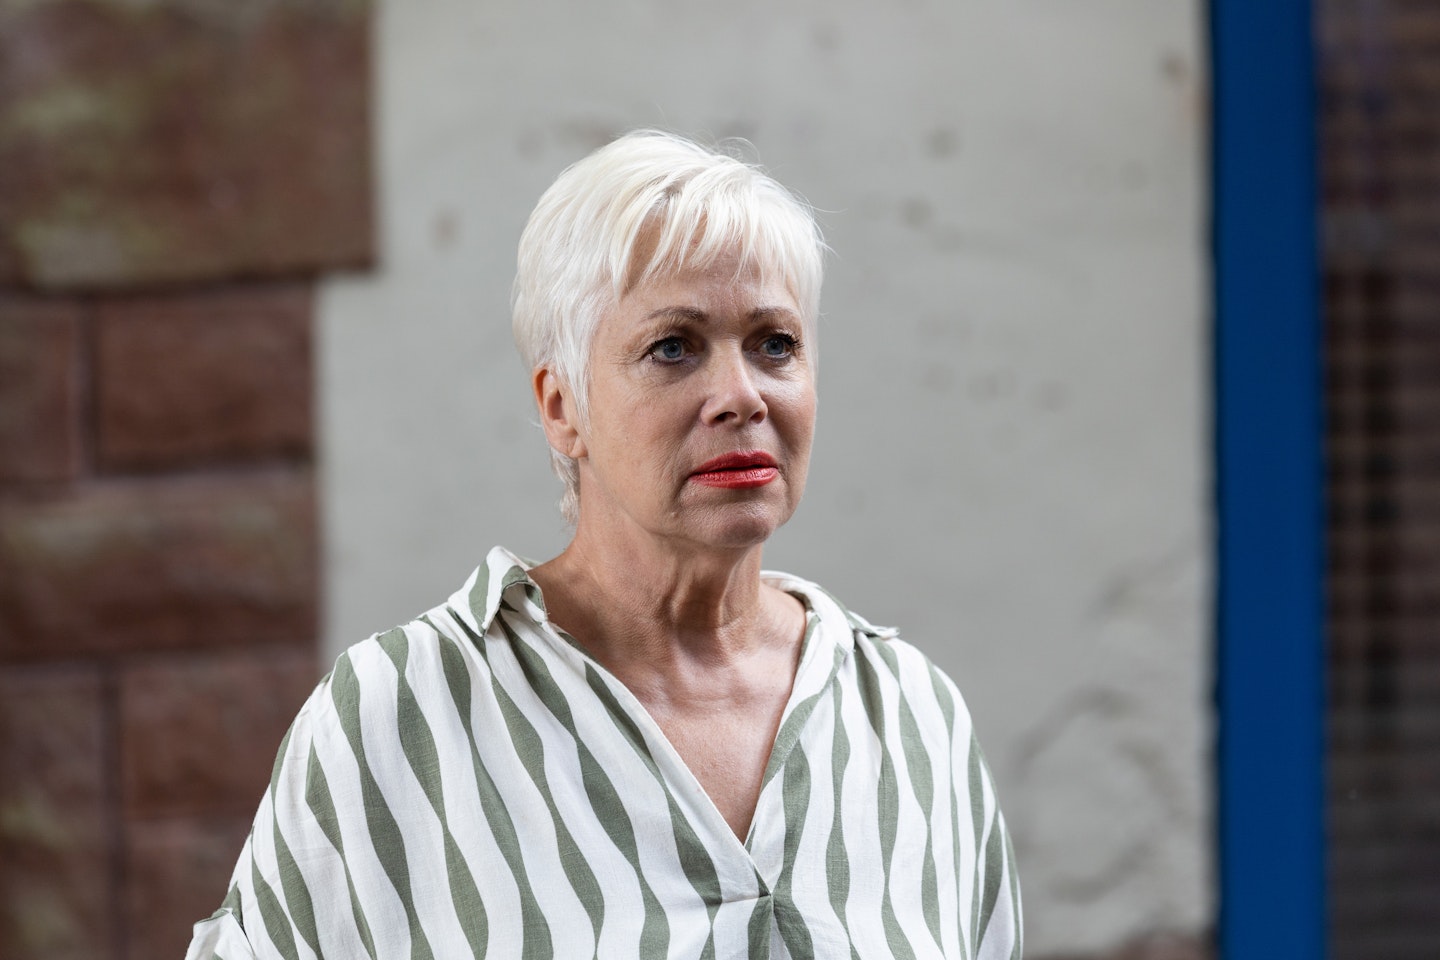 Trish Minniver (played by Denise Welch)